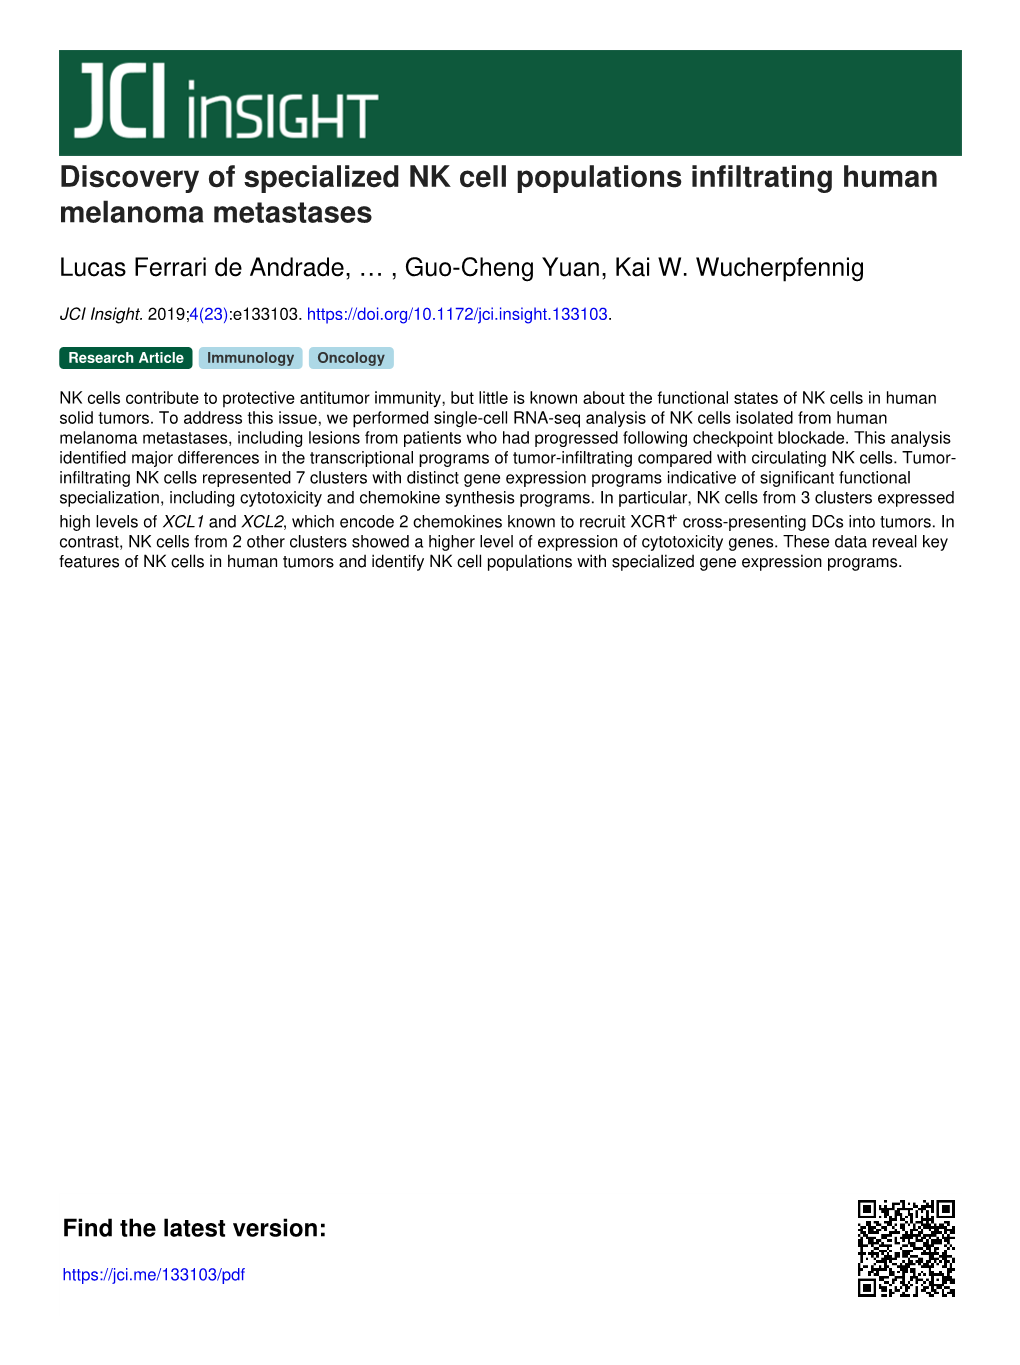 Discovery of Specialized NK Cell Populations Infiltrating Human Melanoma Metastases